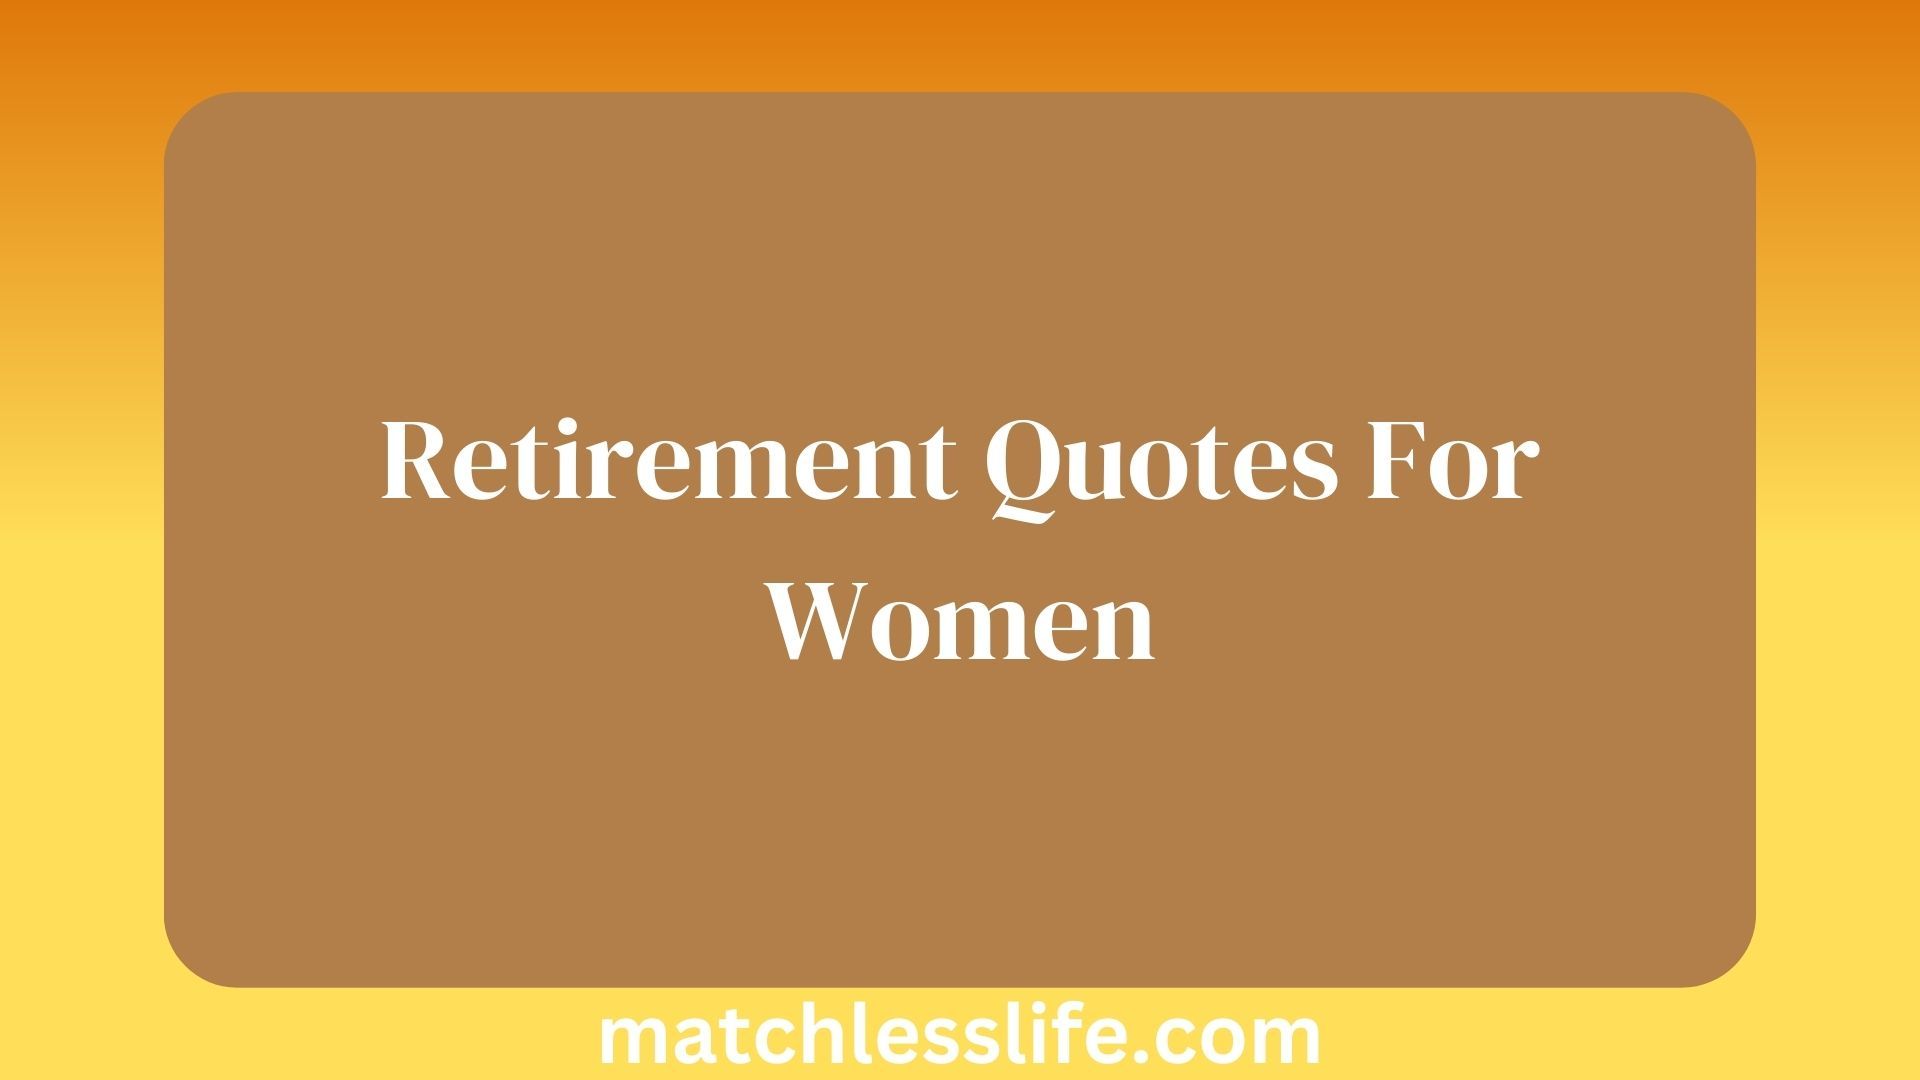 Retirement Quotes For Women